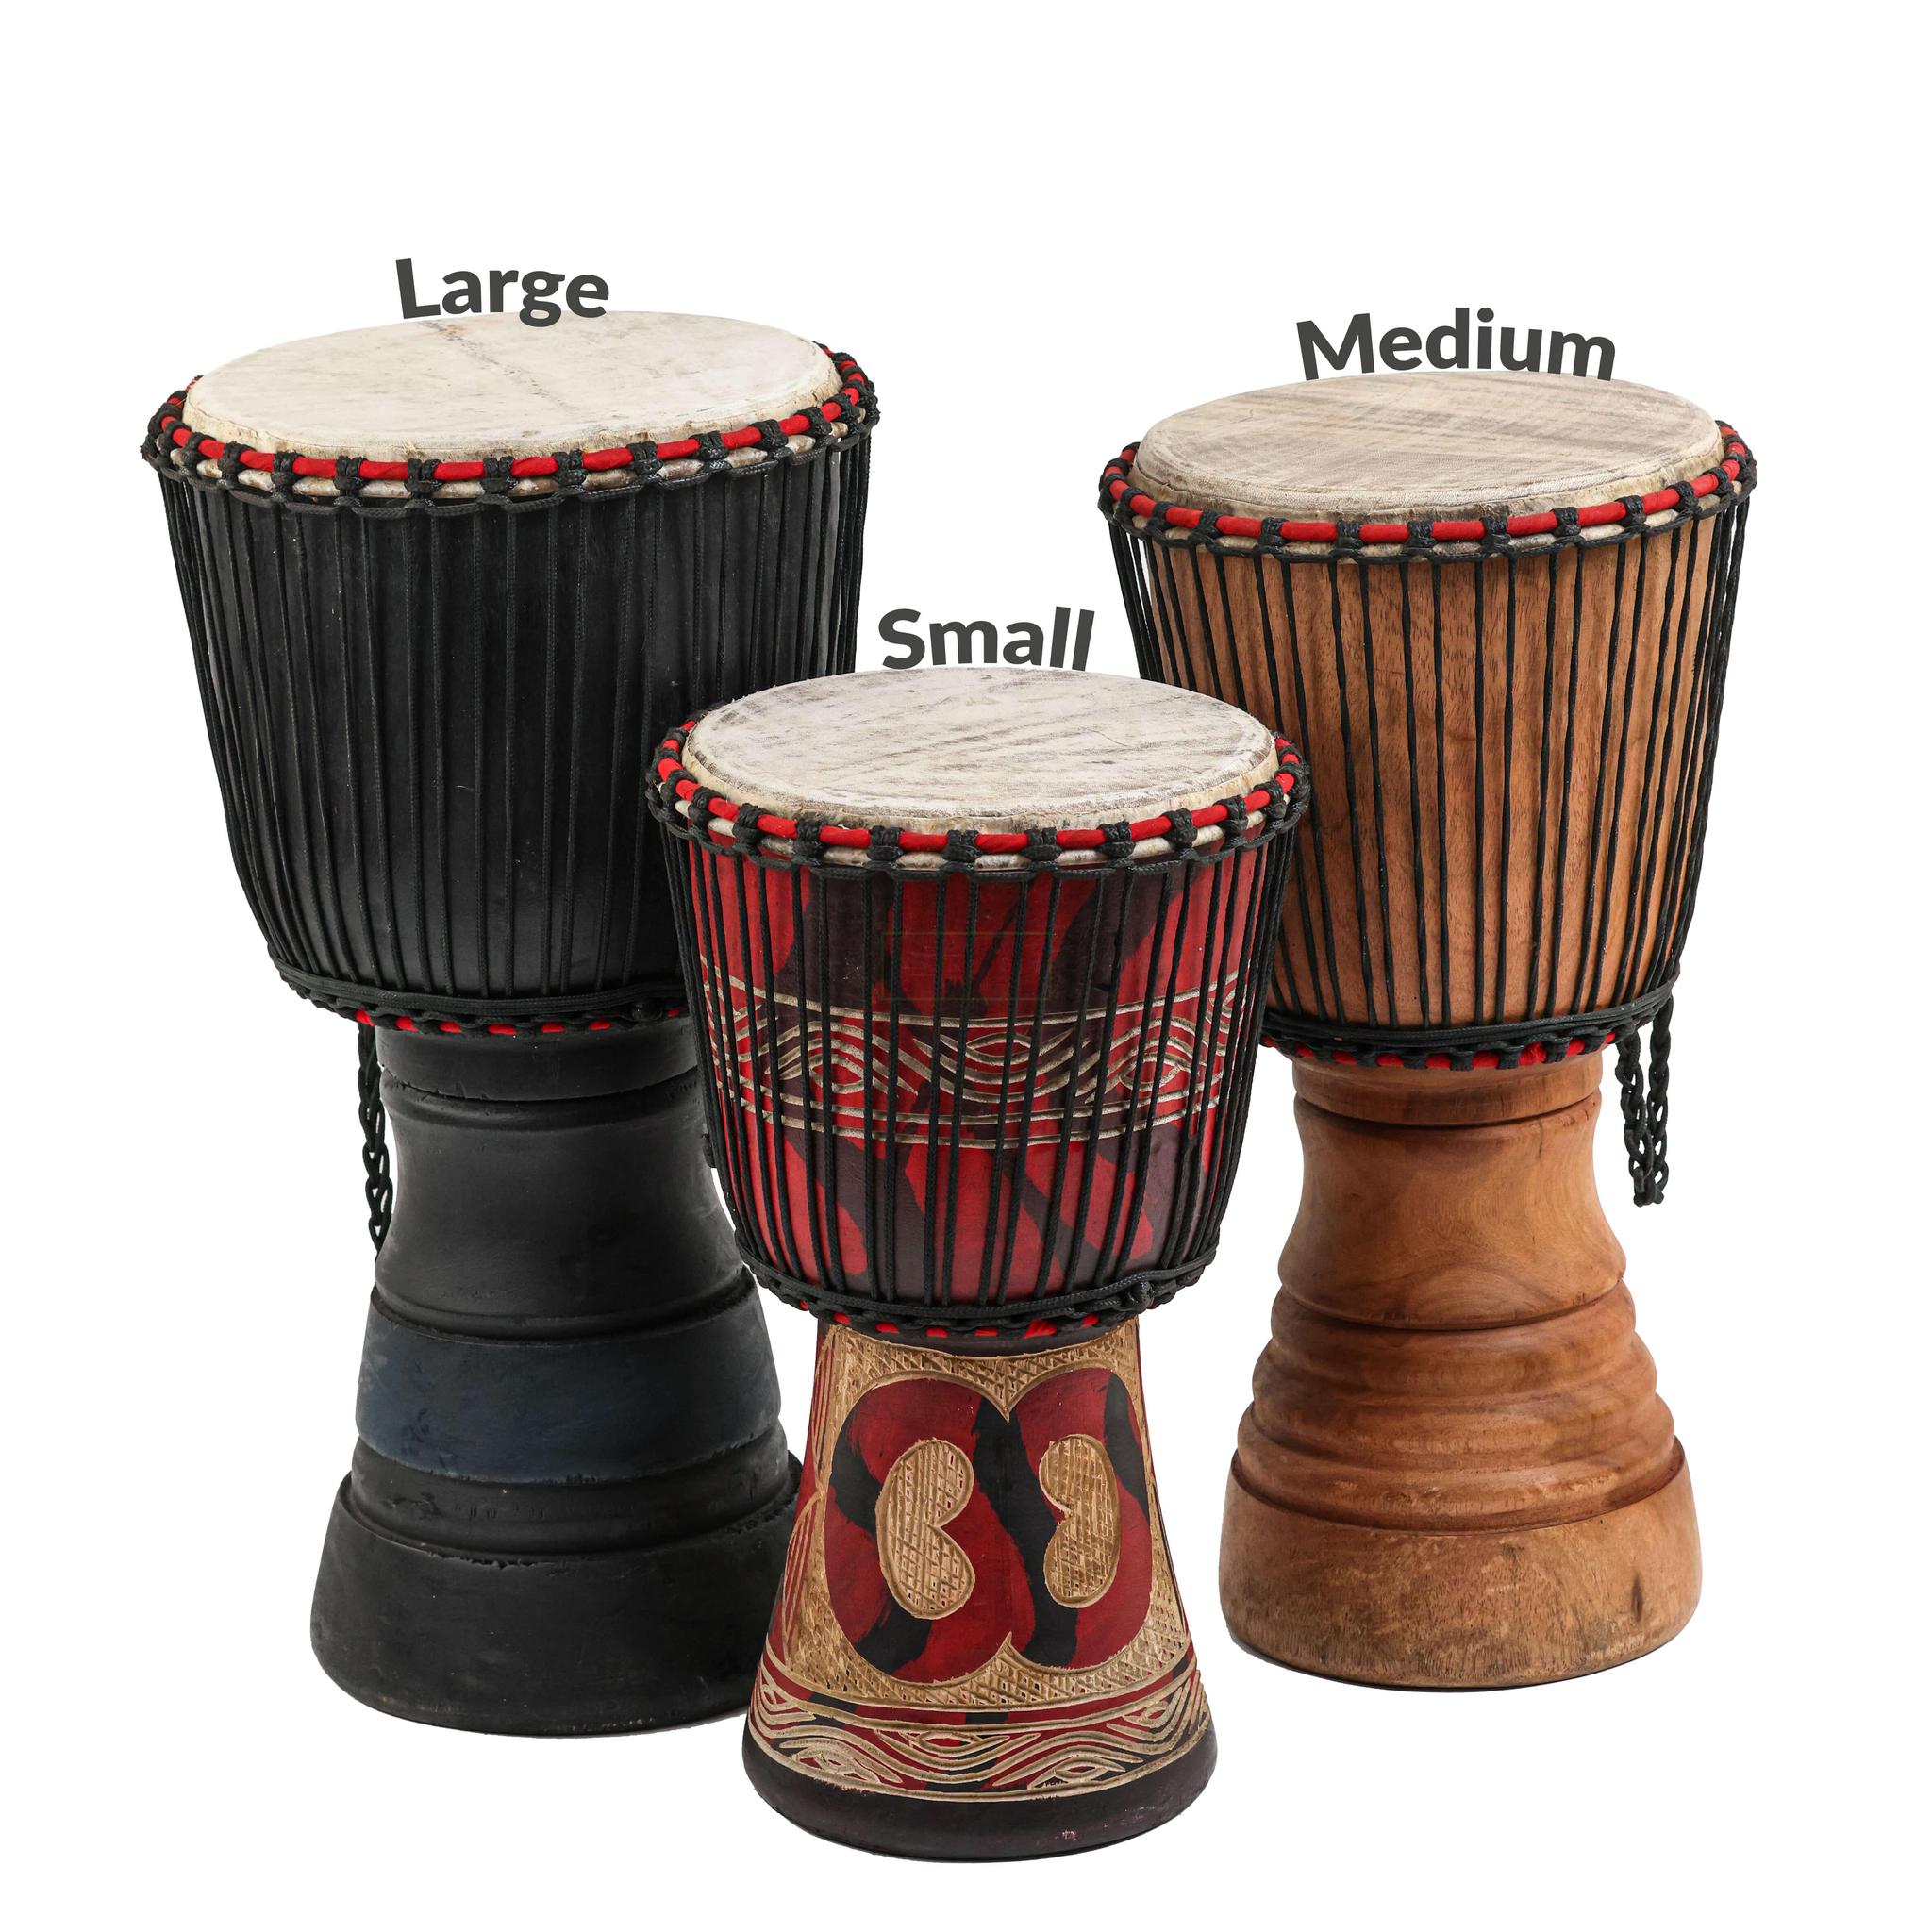 Black Wood Carving - Djembe Drum - Small